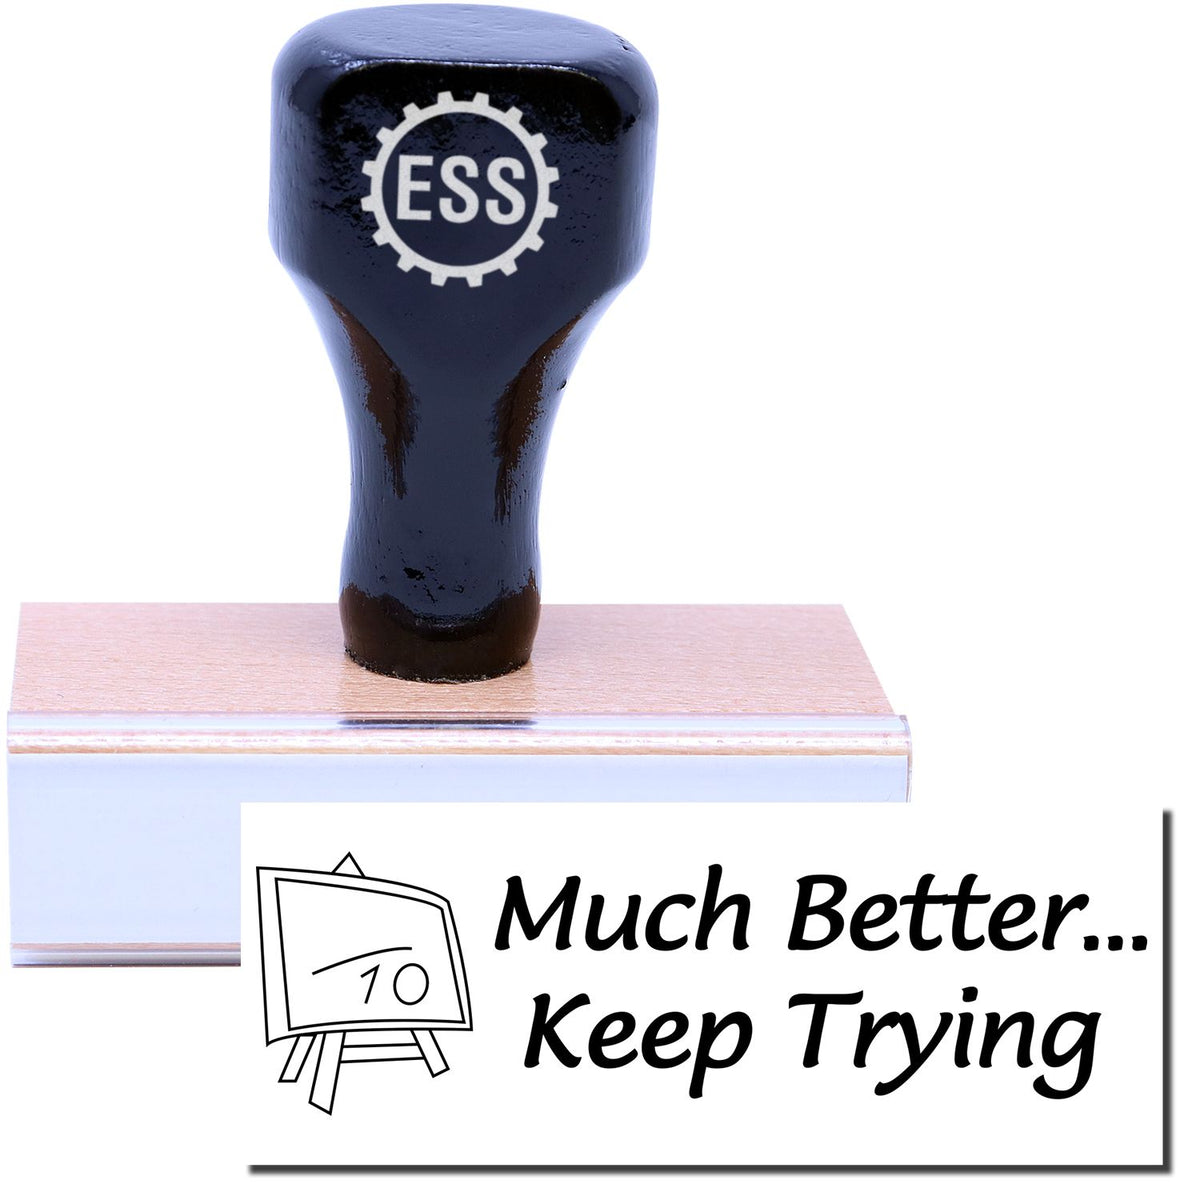 A stock office rubber stamp with a stamped image showing how the text &quot;Much Better... Keep Trying&quot; with a whiteboard showing a number 10 (with a line above it) on the left side is displayed after stamping.